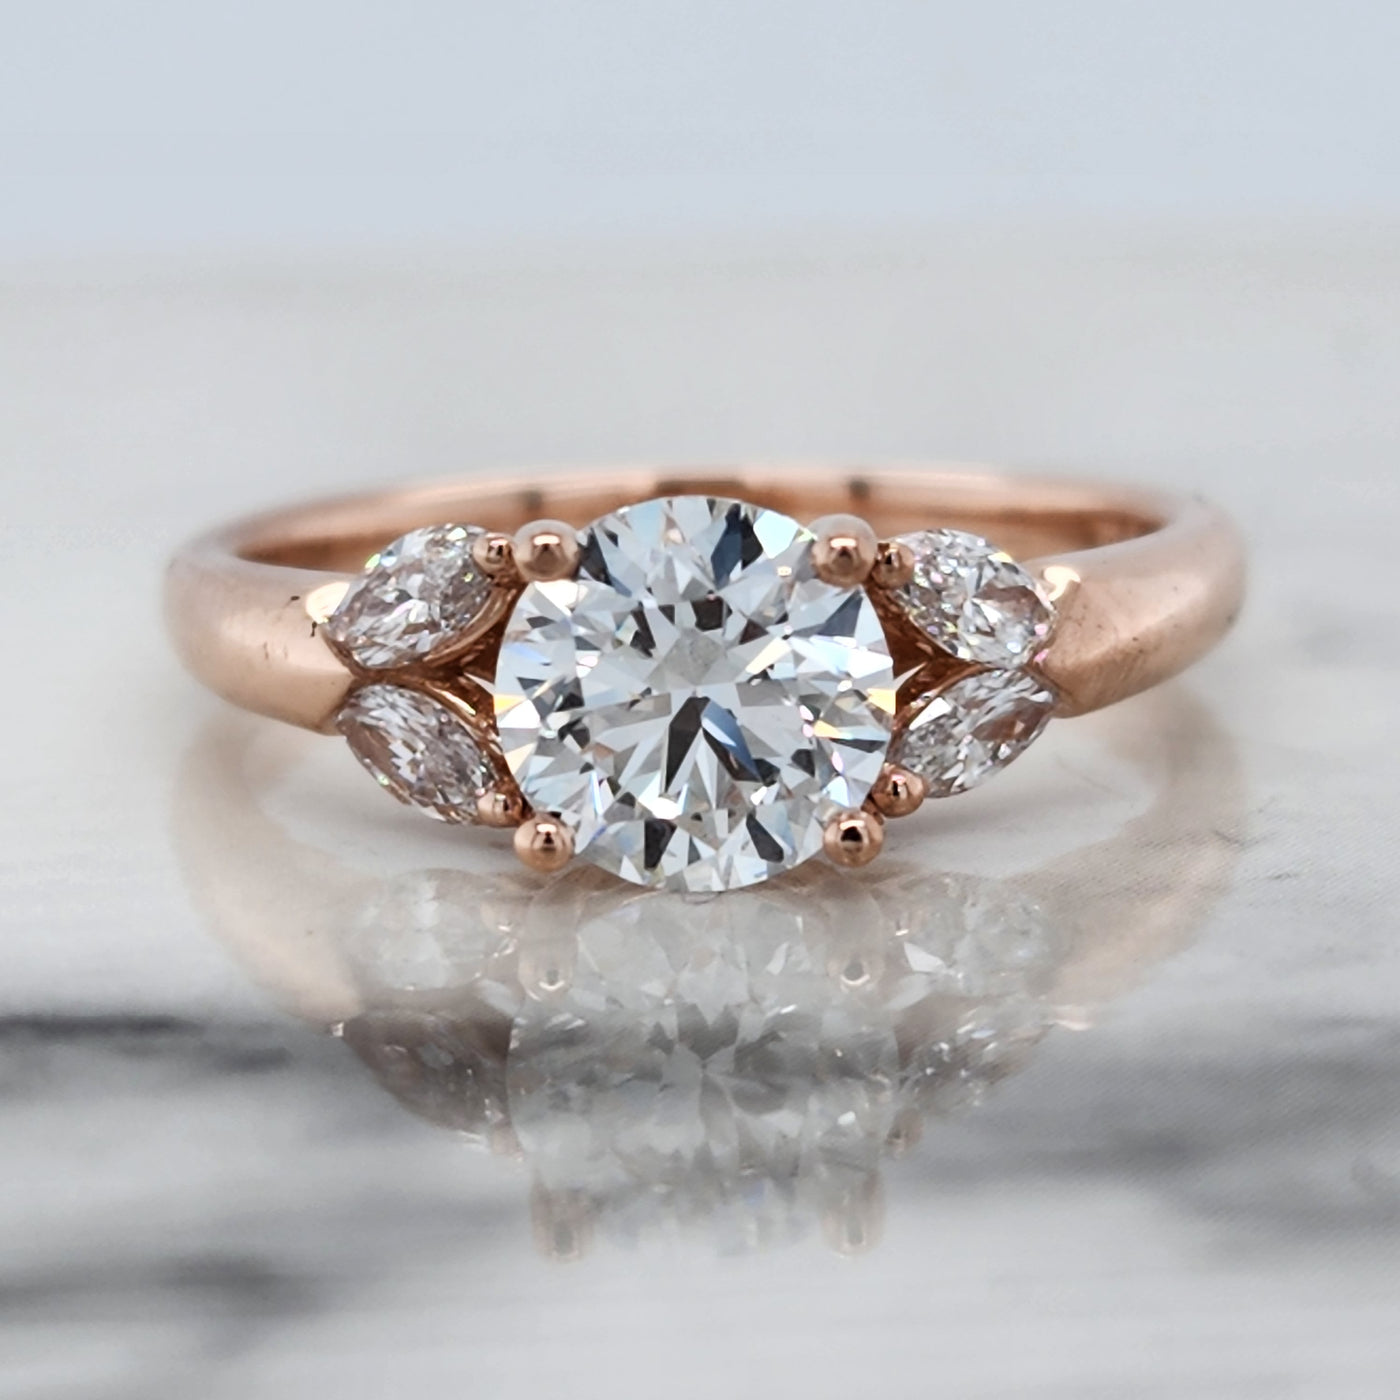 Rose Gold Engagement Ring With Round Center Diamond and Marquise Accent Diamonds